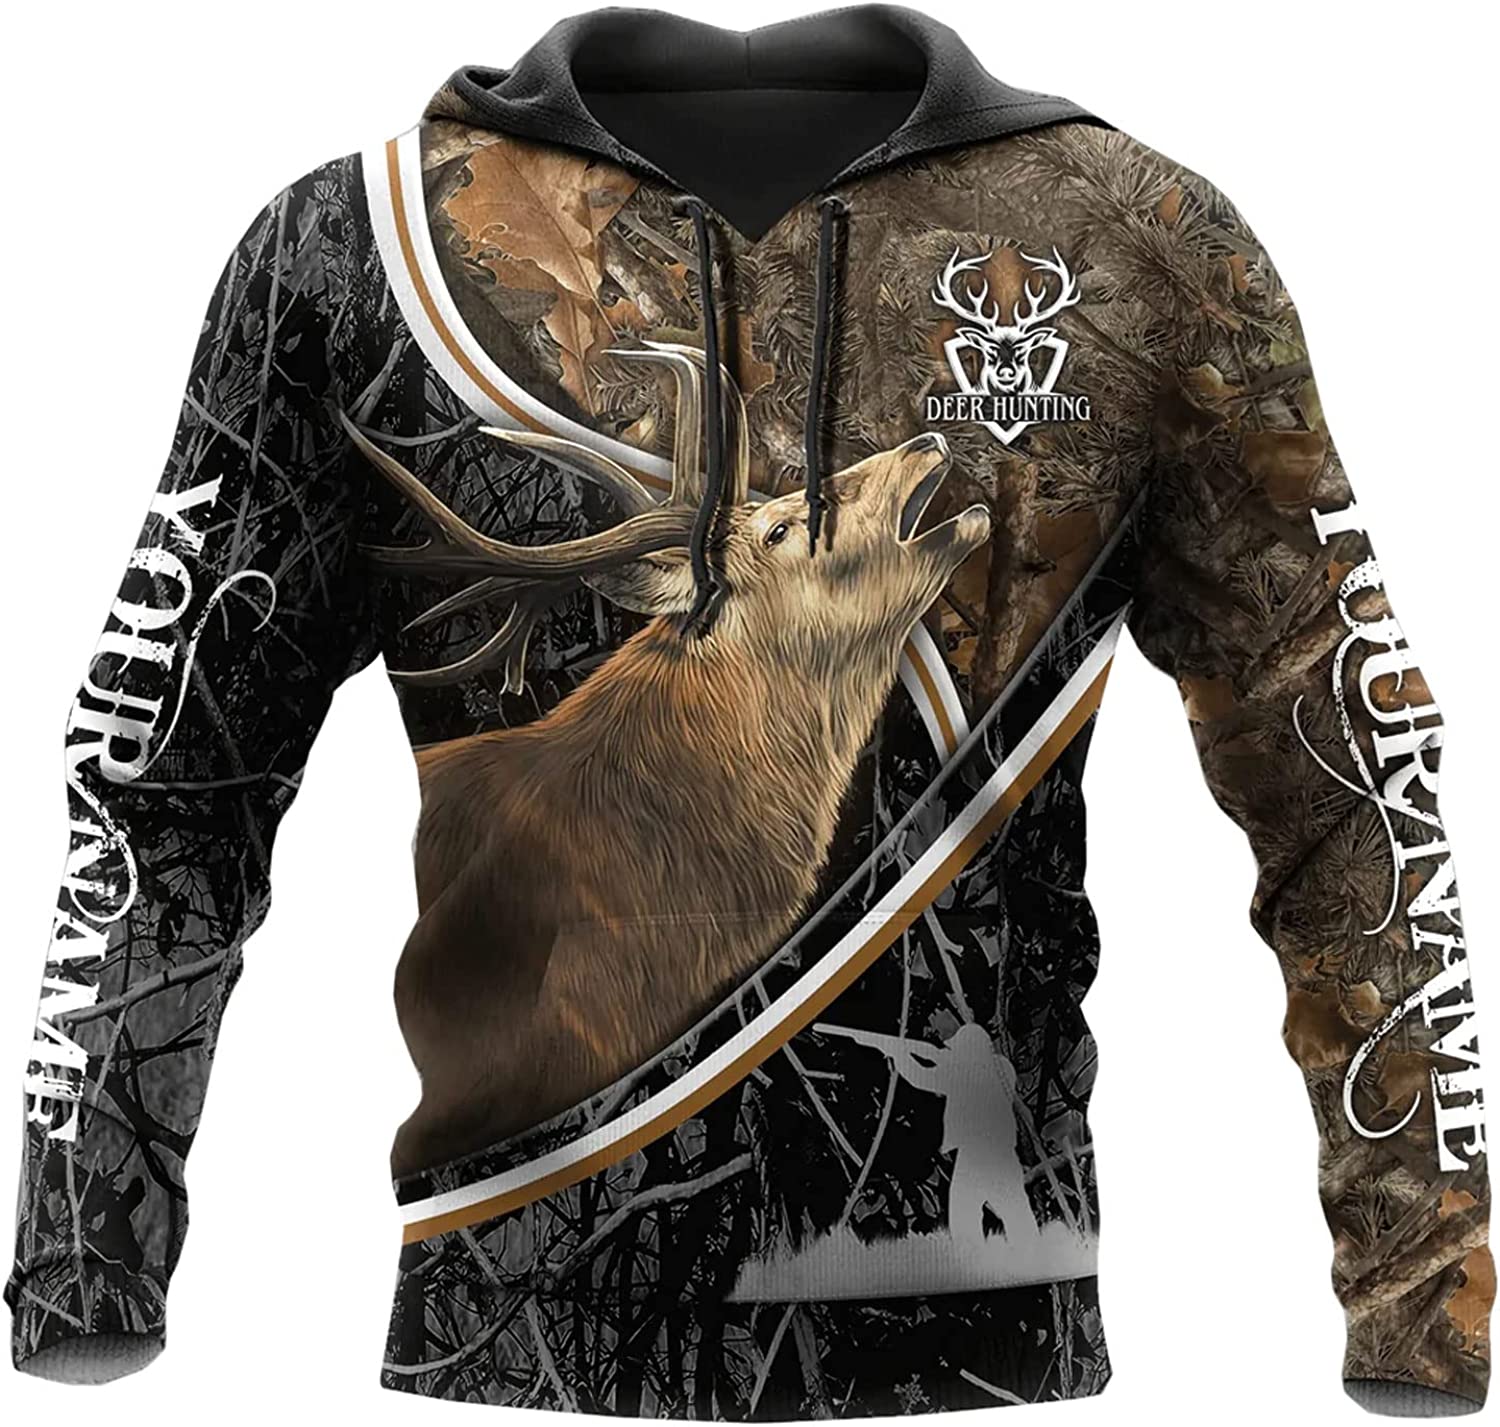 Deer Hunting 3D Shirt with Custom Full Print – Perfect Gift for Deer Hunter Lovers and Families who Love Animal Hunting – JOT1502